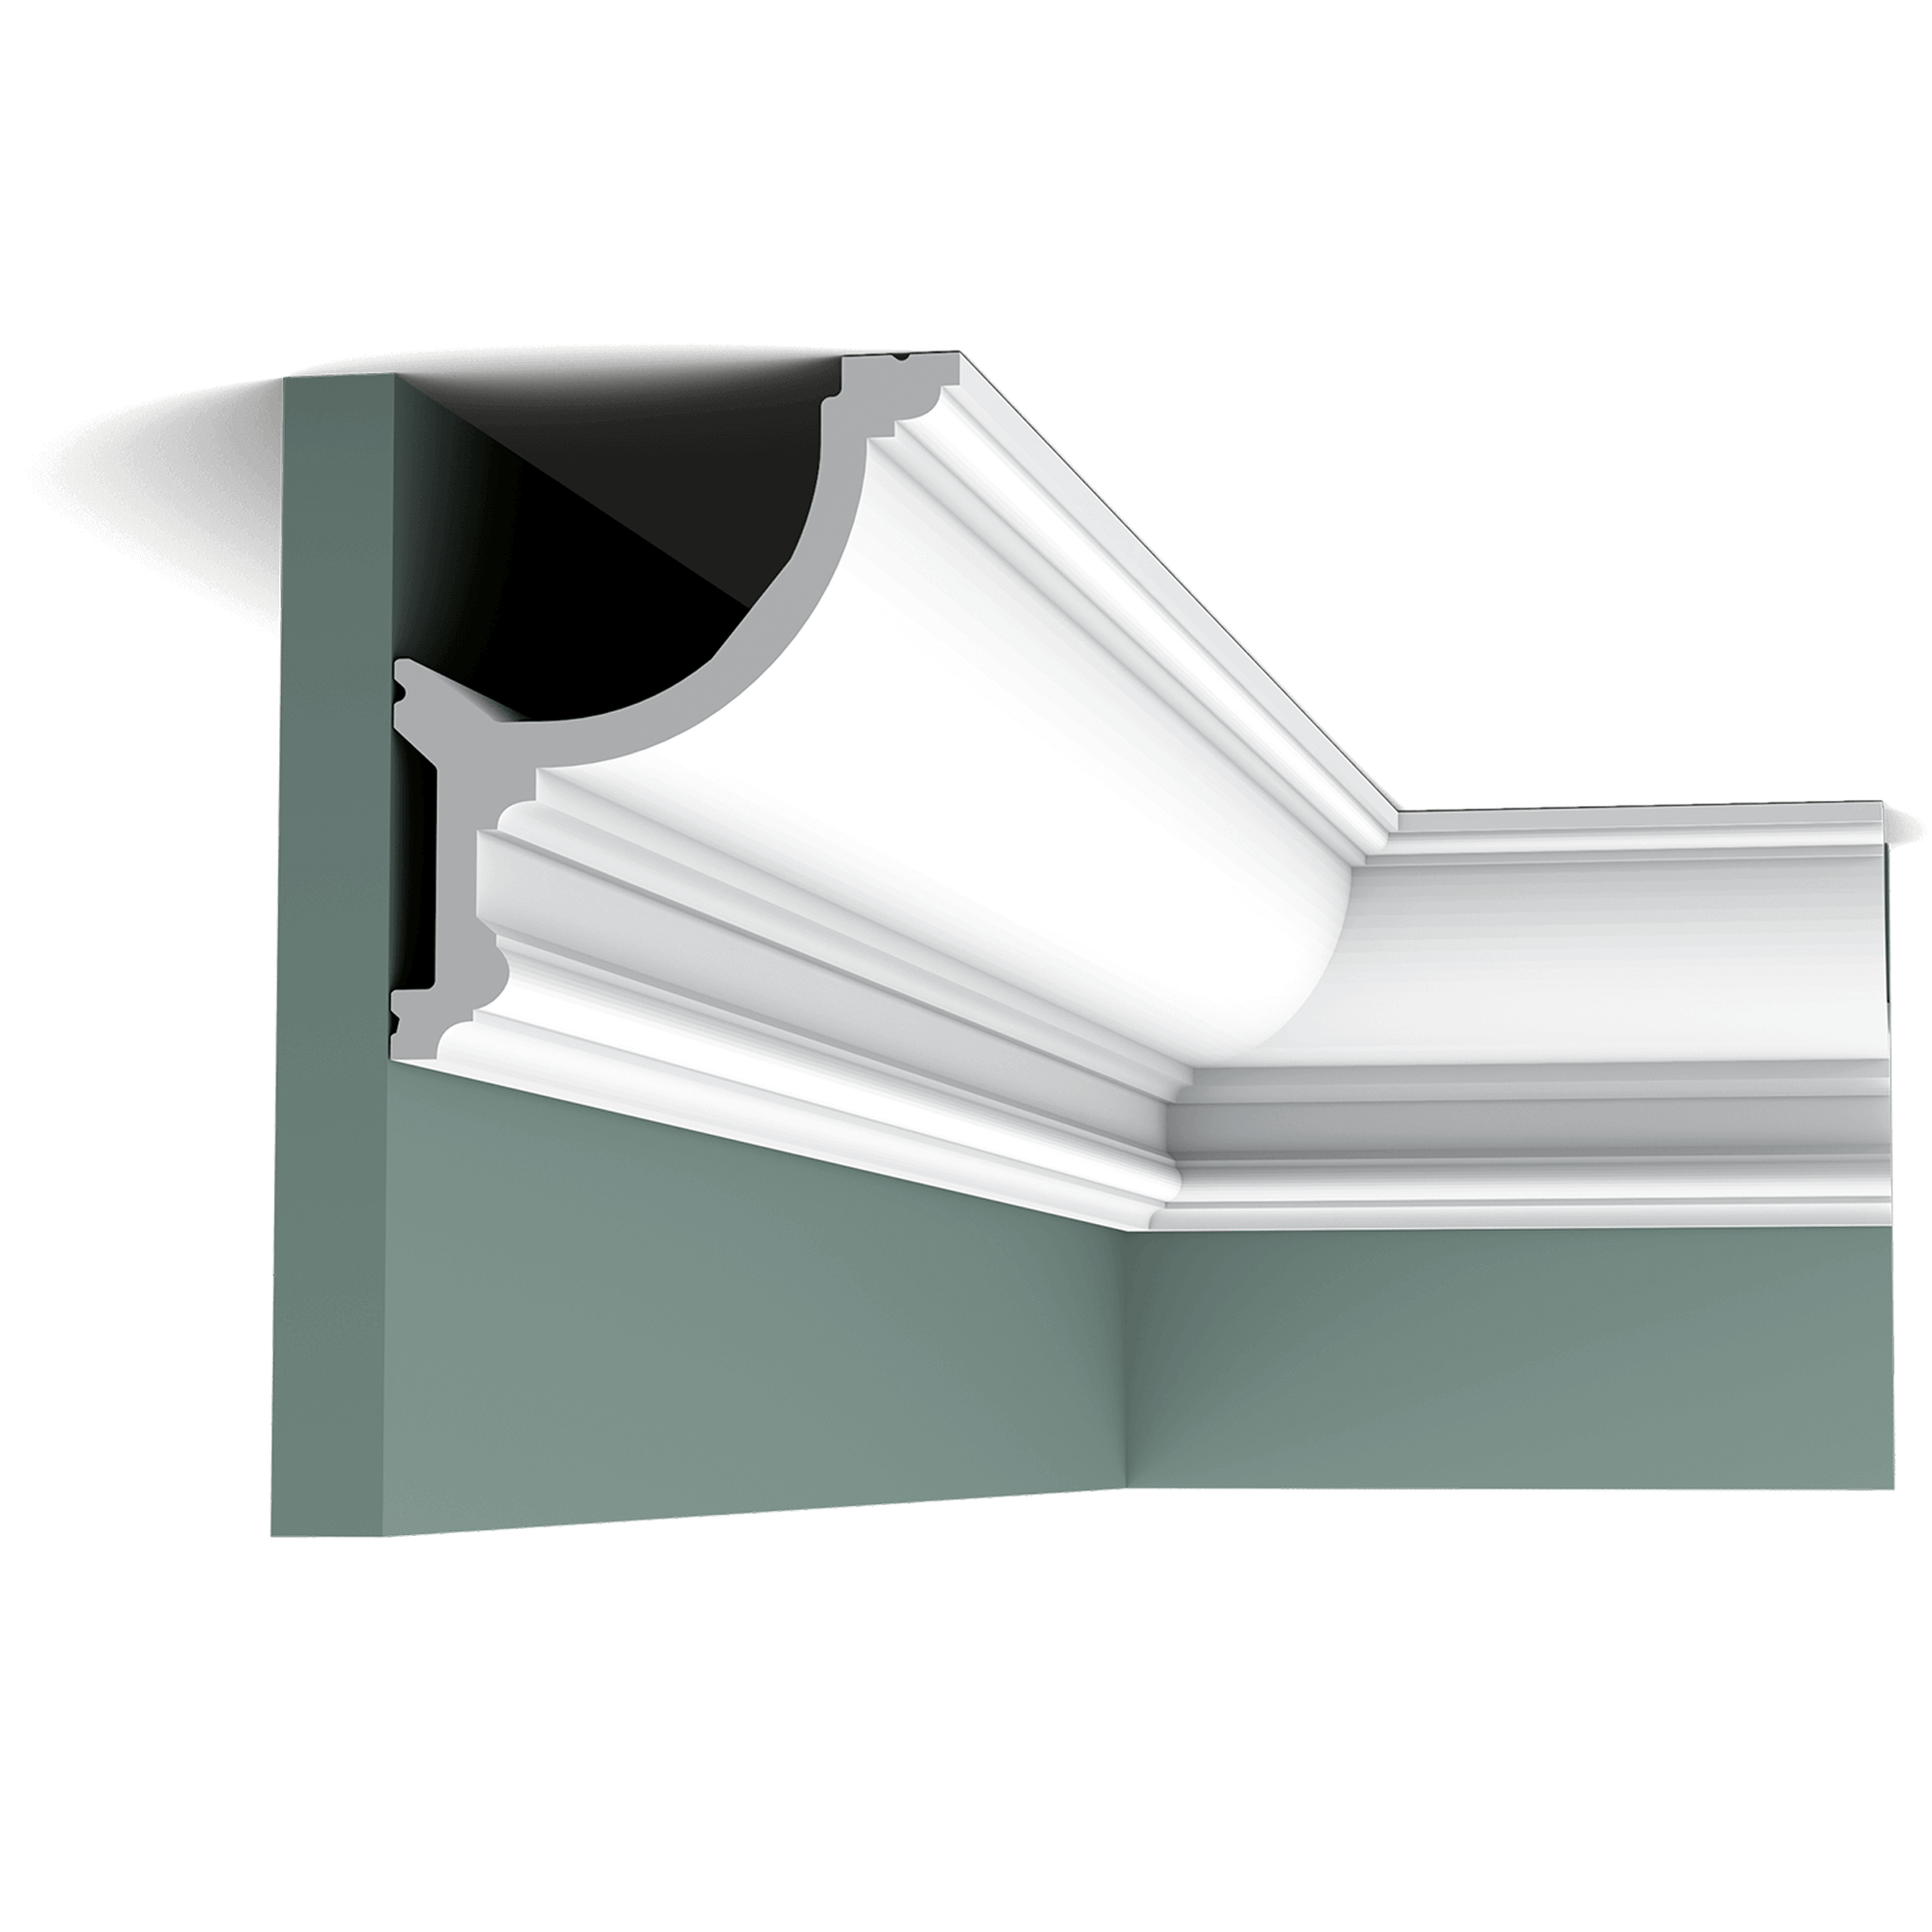 c901 cornice moulding 0ac1 Large Ovolo-inspired cornice moulding. Fits all types of interiors effortlessly. Installation remark: It is necessary to screw this profile on the wall.